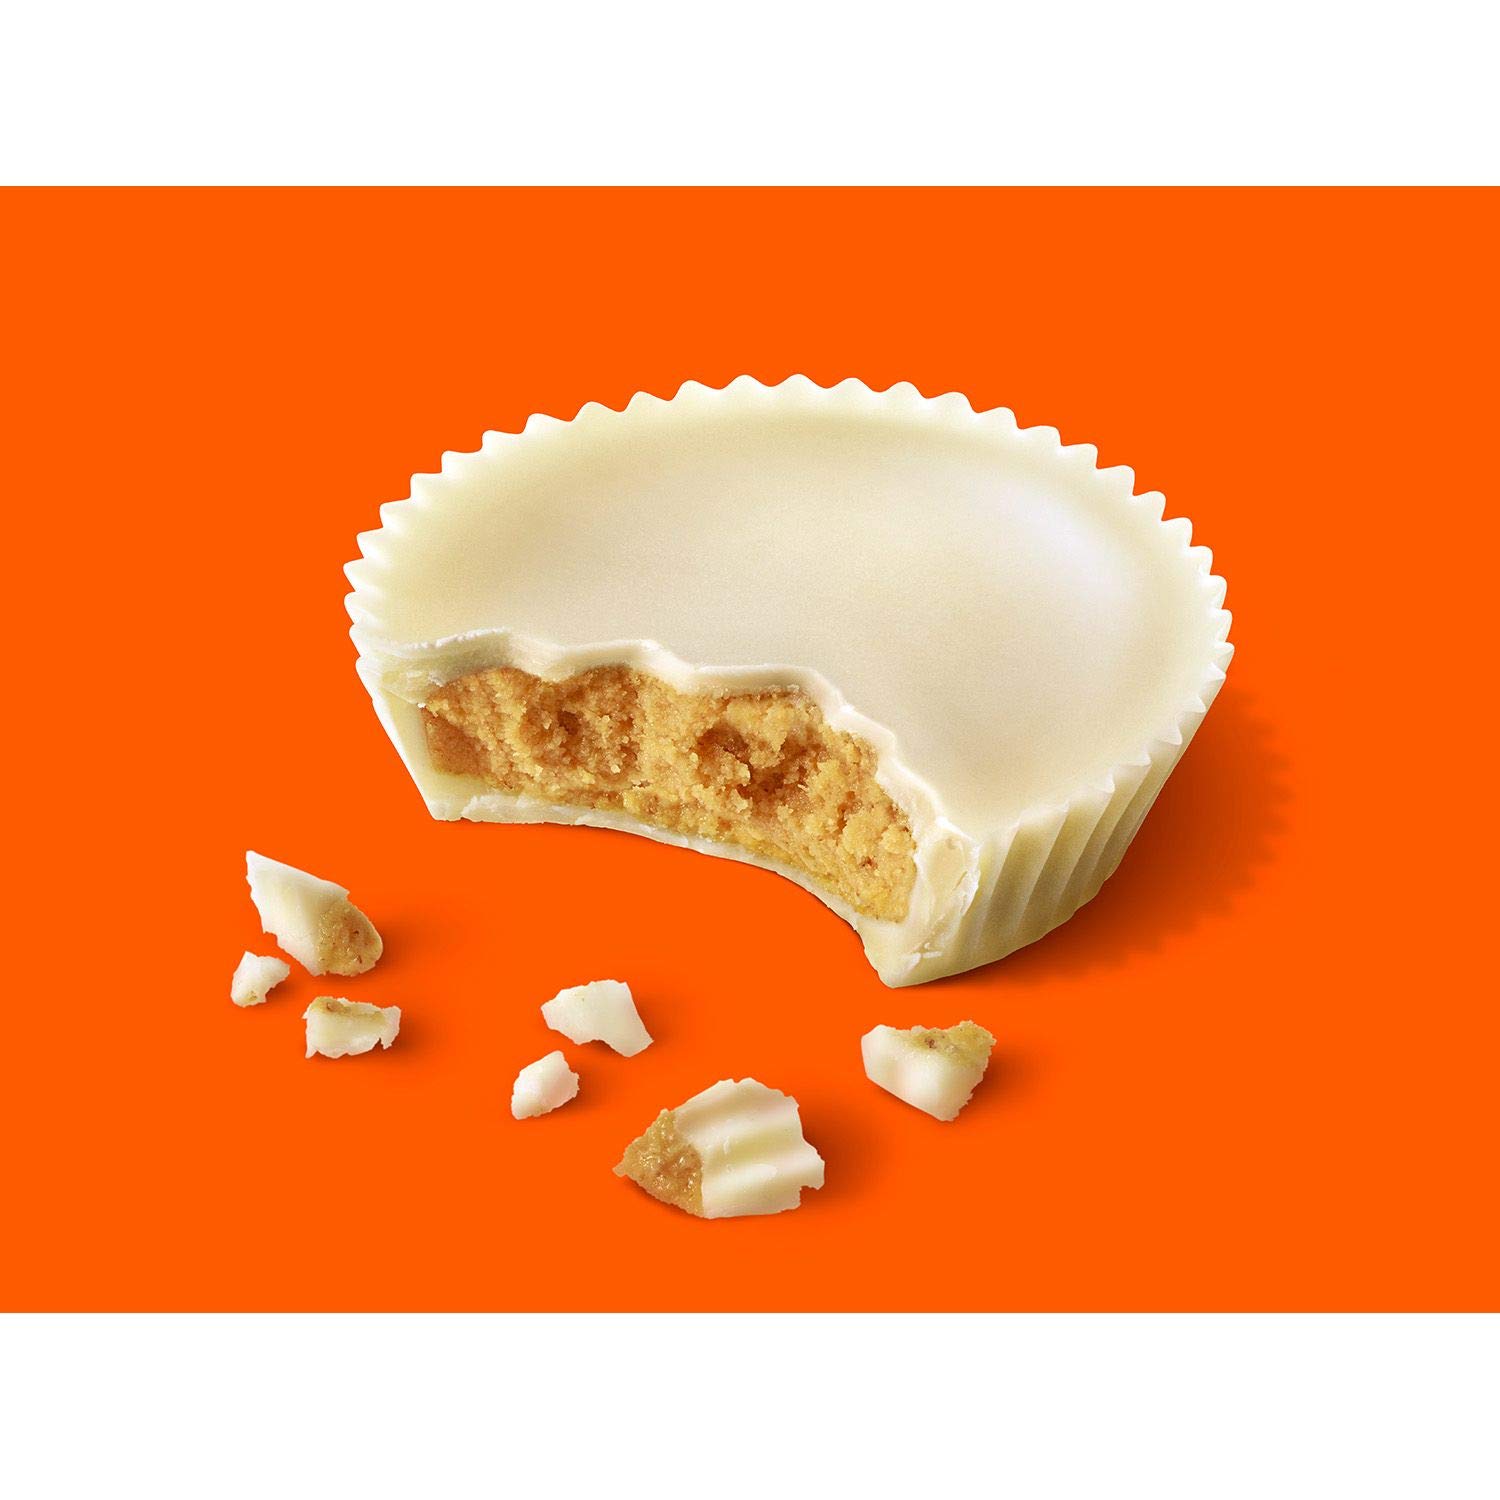 Reese's White Peanut Butter Cups Kings Size